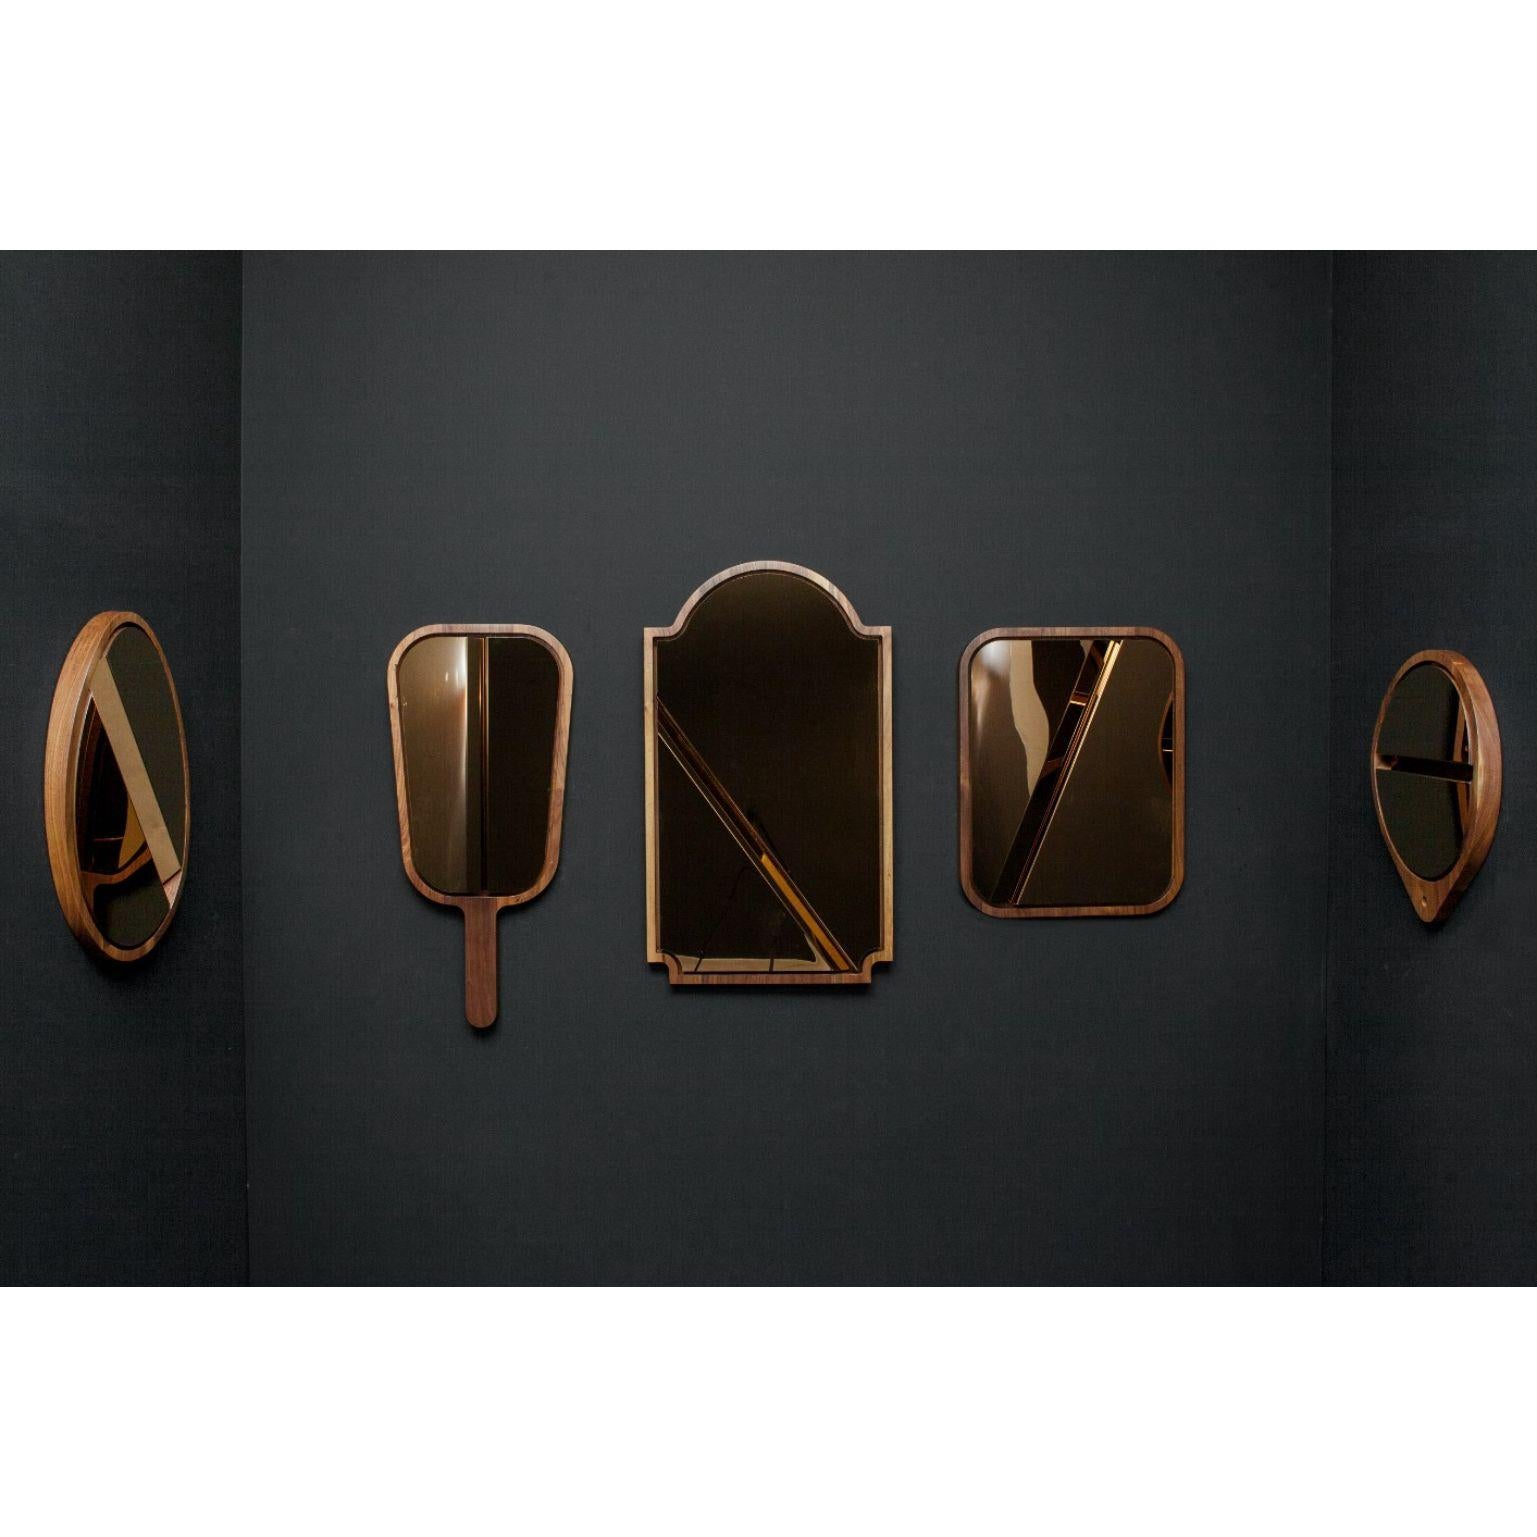 Set of 5 please don't tell mom mirrors by Marc Dibeh
2015
Materials: American walnut, Polished Stainless Steel, Rose Gold Finish
Dimensions: W48 x H66 x D4 cm 
W48 x H90 x D4 cm
W56 x H93 x D4 cm
W55 x H60 x D4 cm
W46 x H52 x D4 cm

This